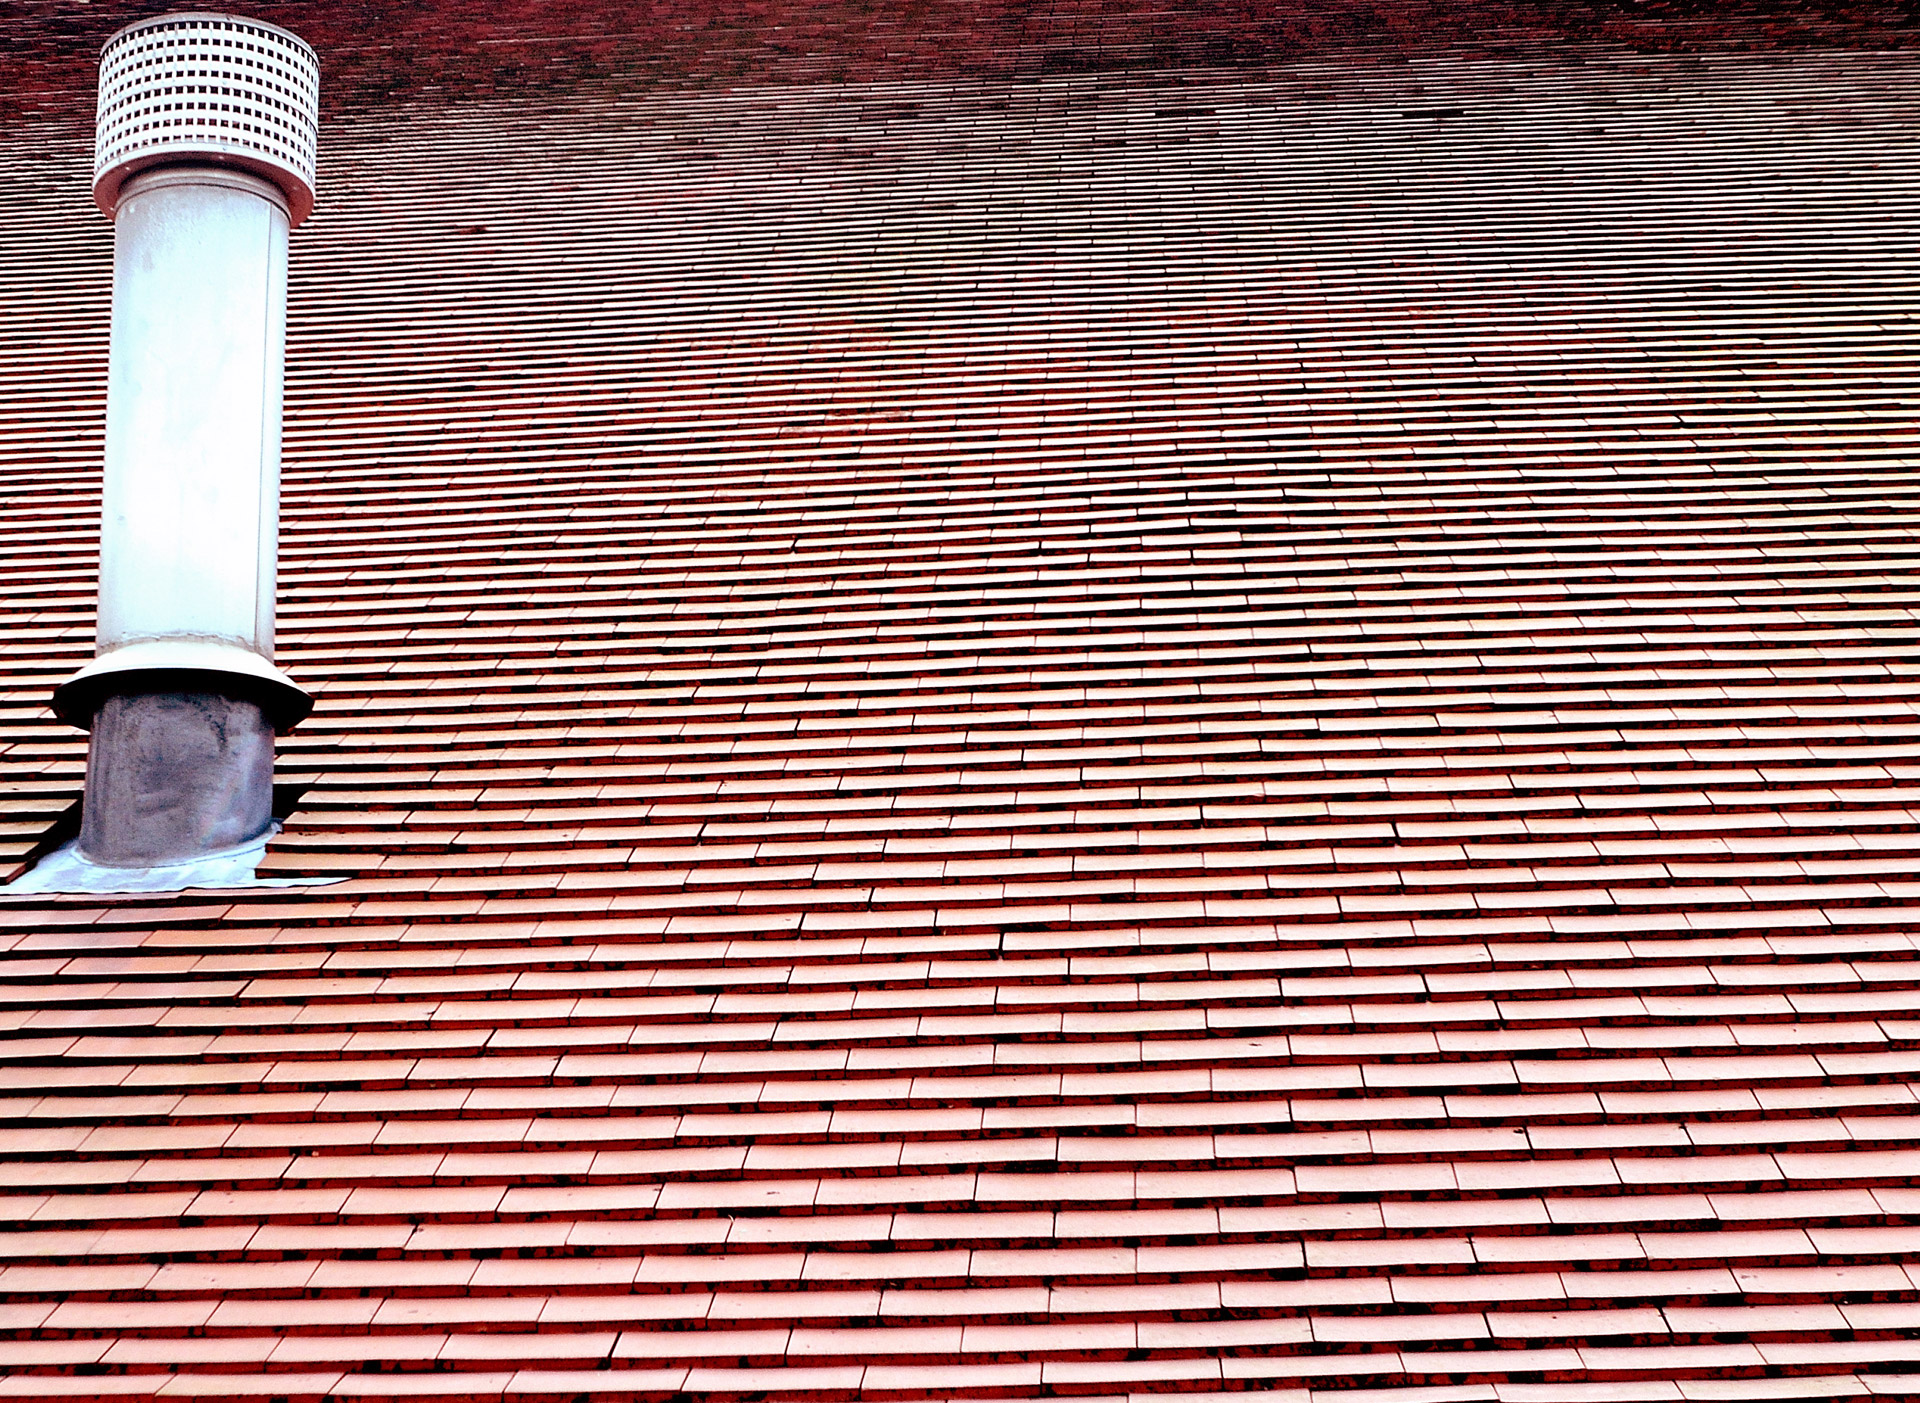 Tile Roofing Near Me Universal City, Los Angeles, CA